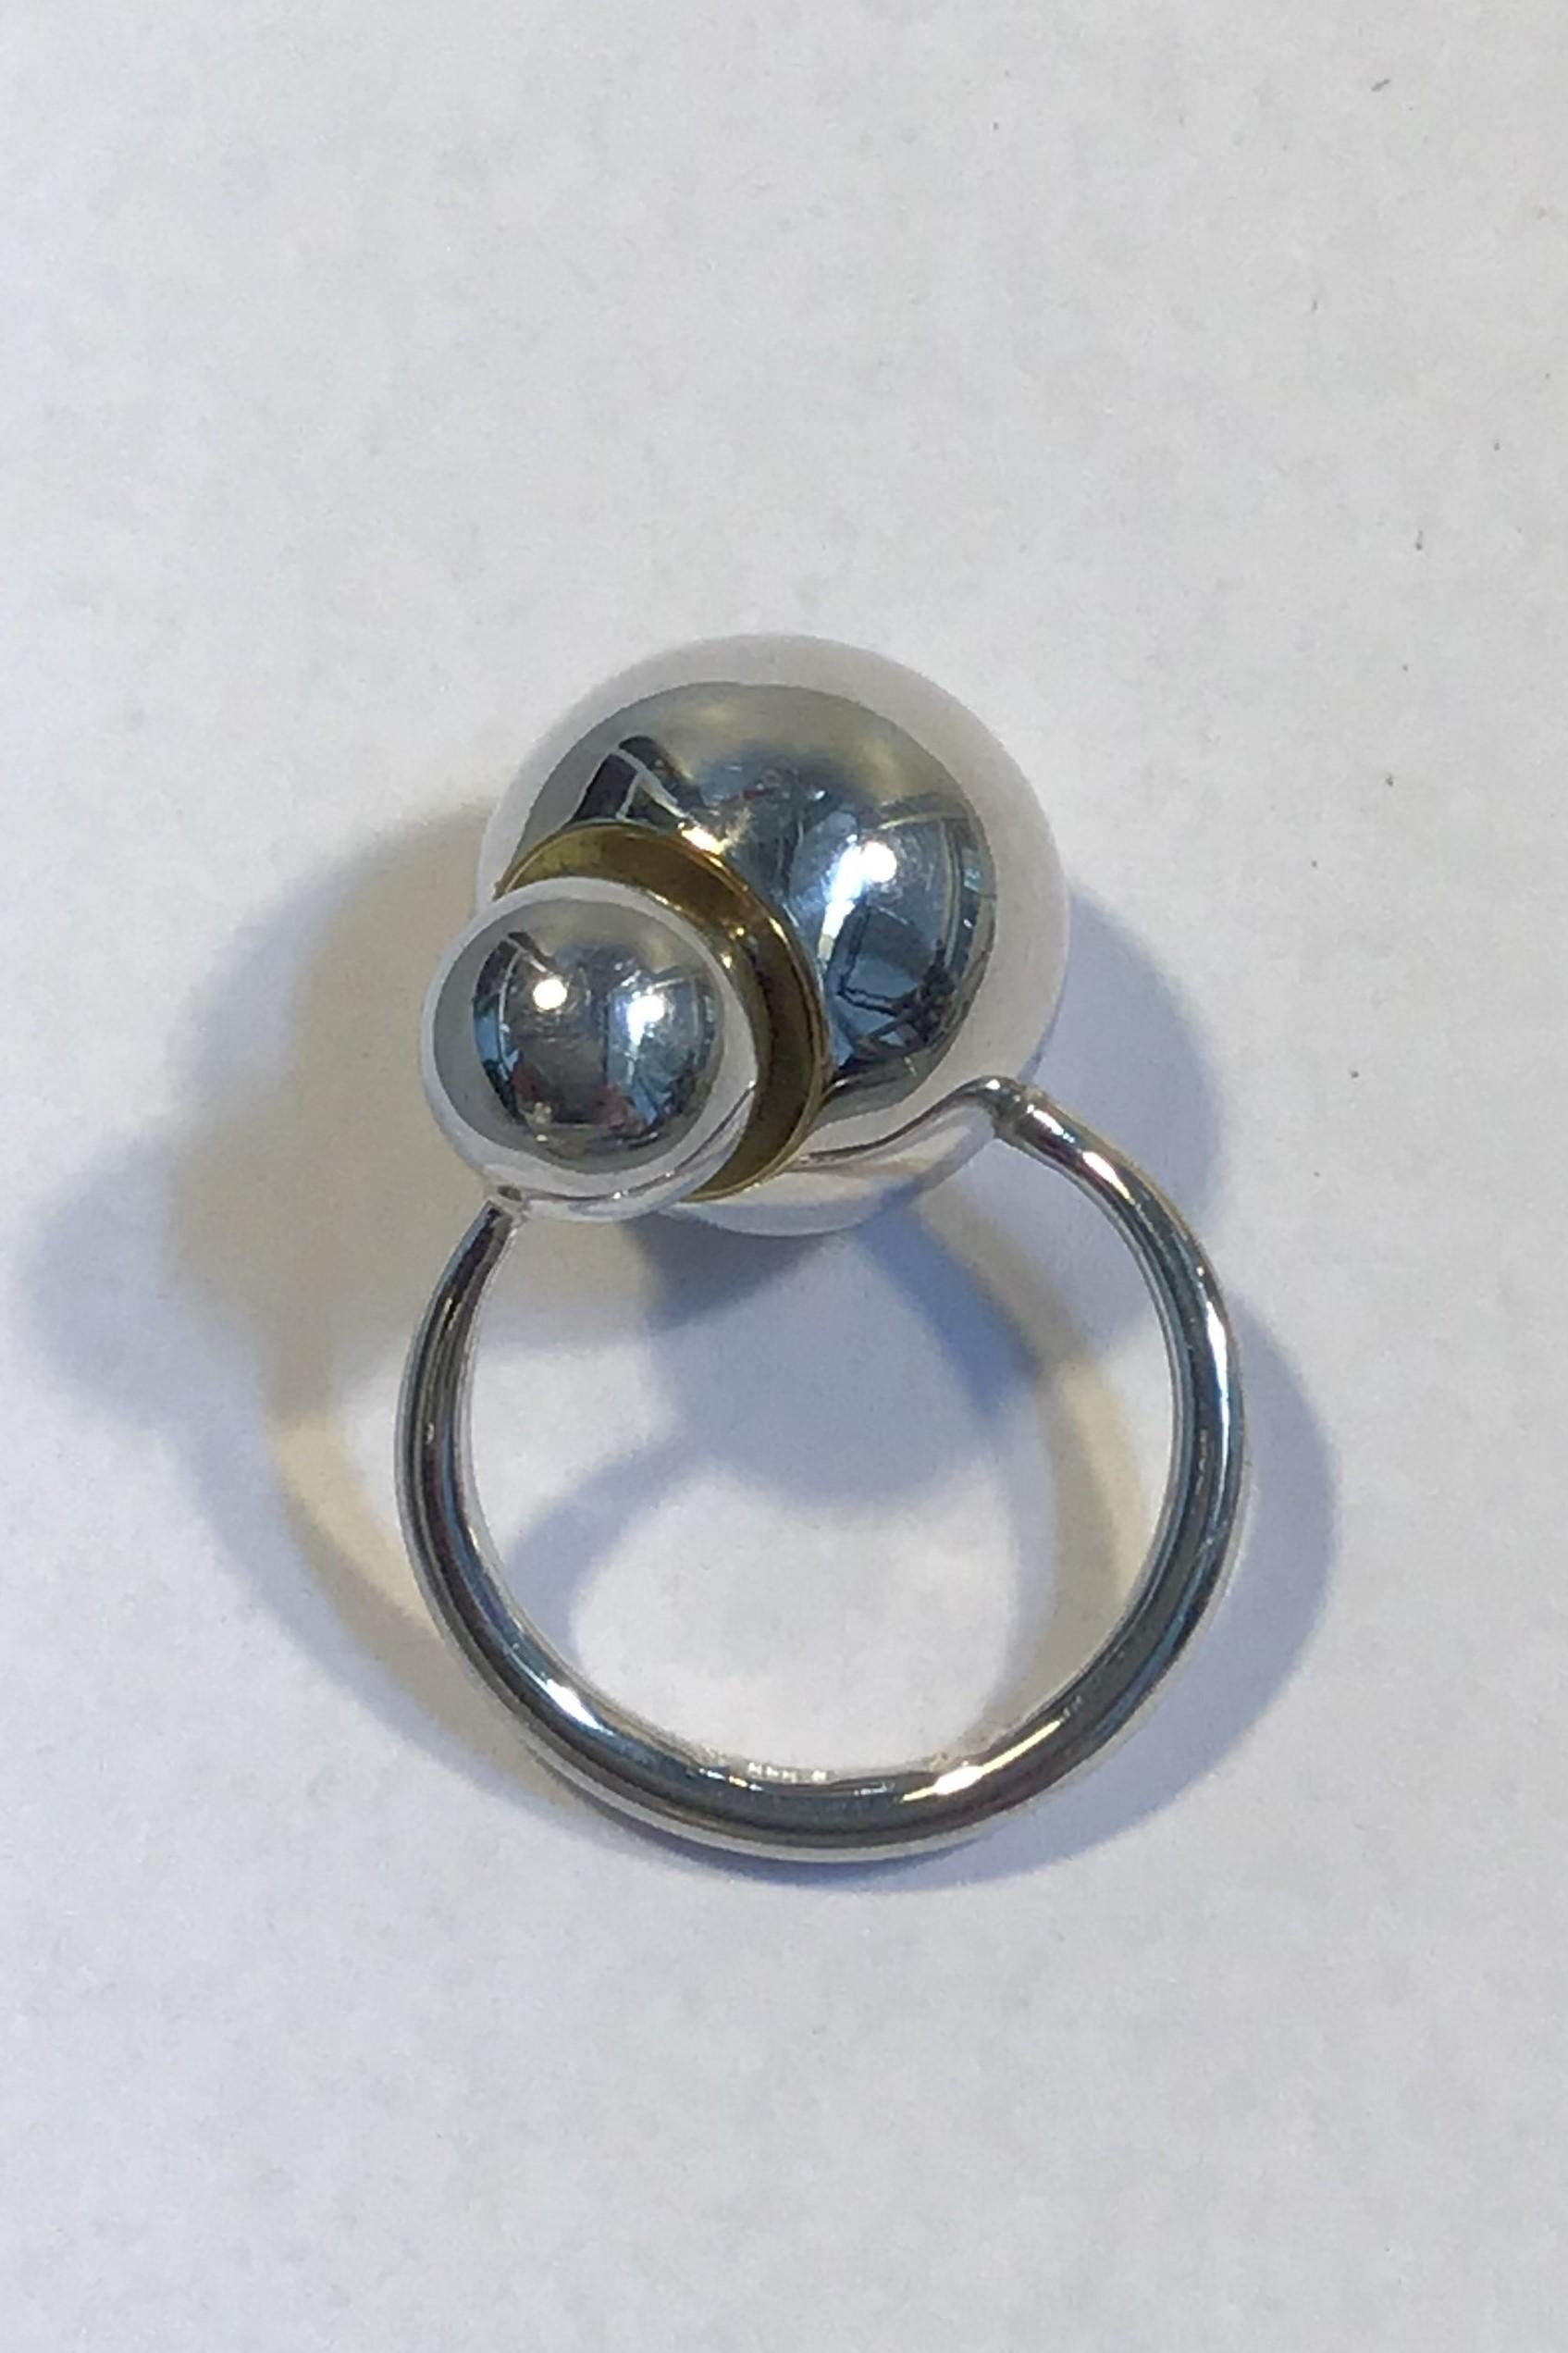 Georg Jensen Sterling Silver with 18 ct Gold. No 509 - Cave Jacqueline Rabun Ring Size 55/US 7 1/4 Weight 12.3 gr/0.43 oz